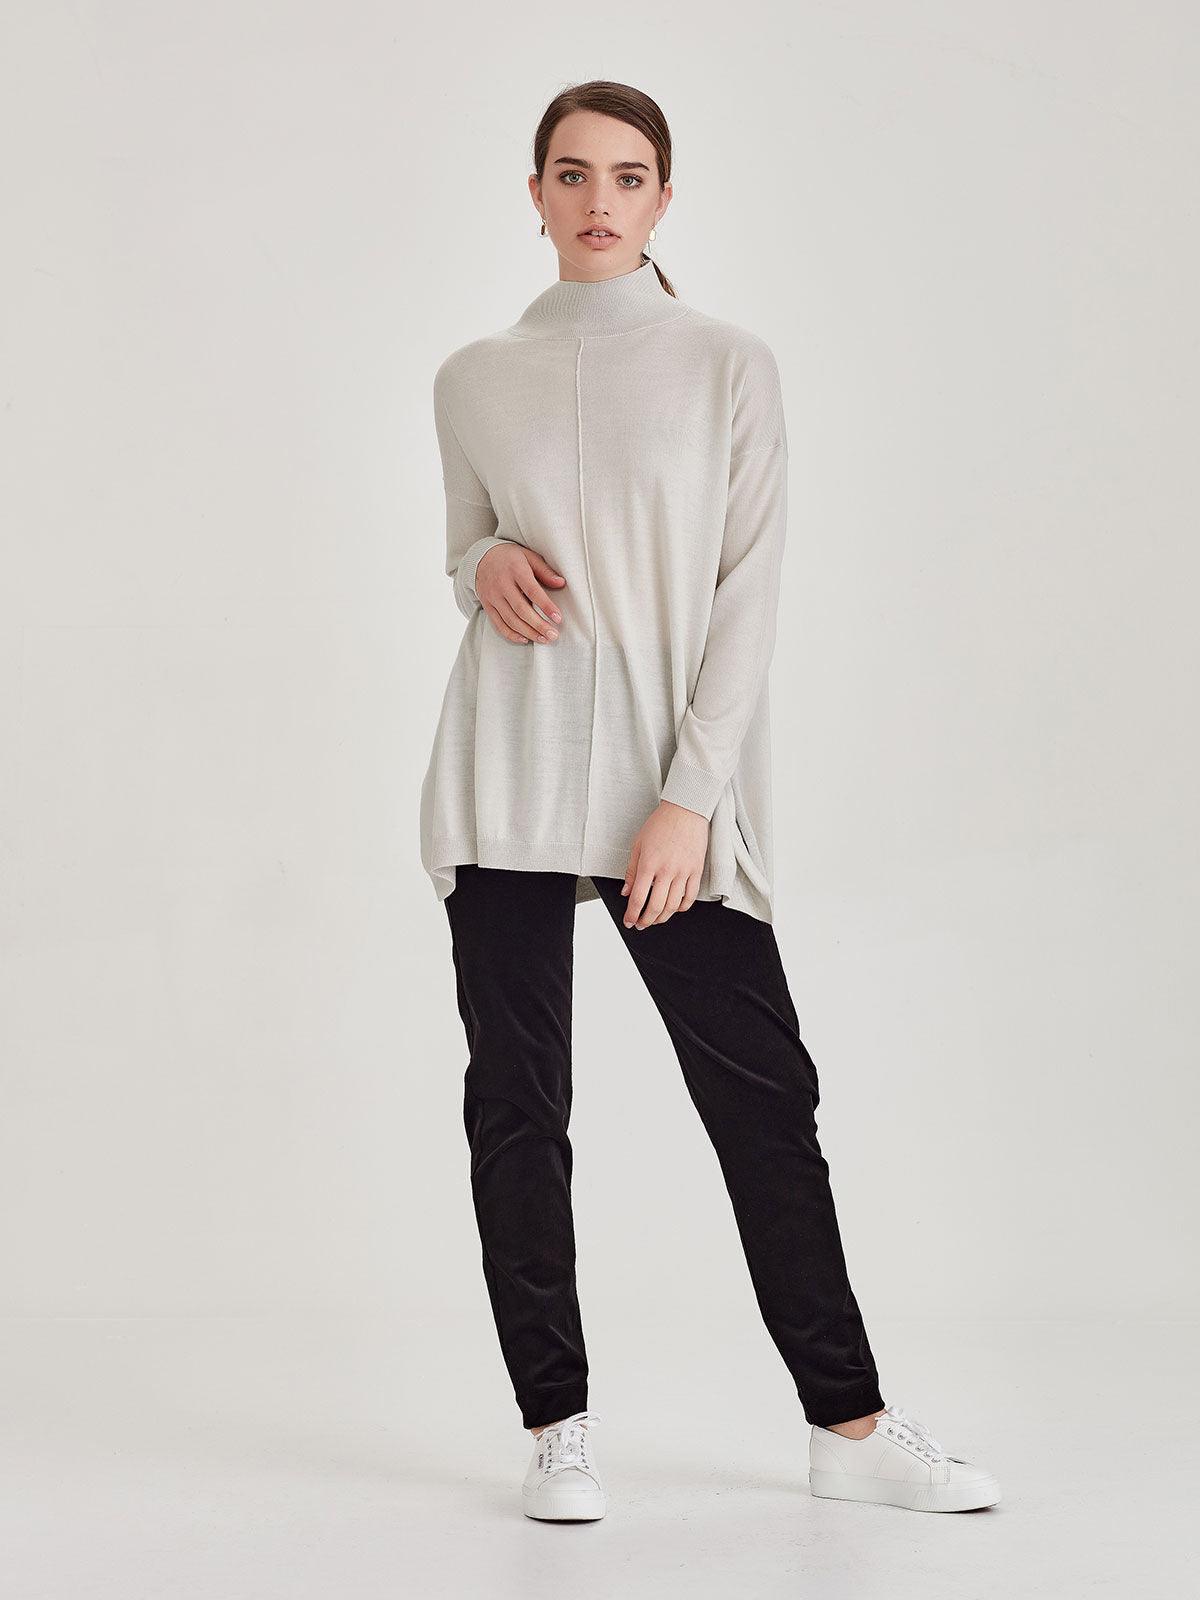 Relaxed fit merino cream top with black pants